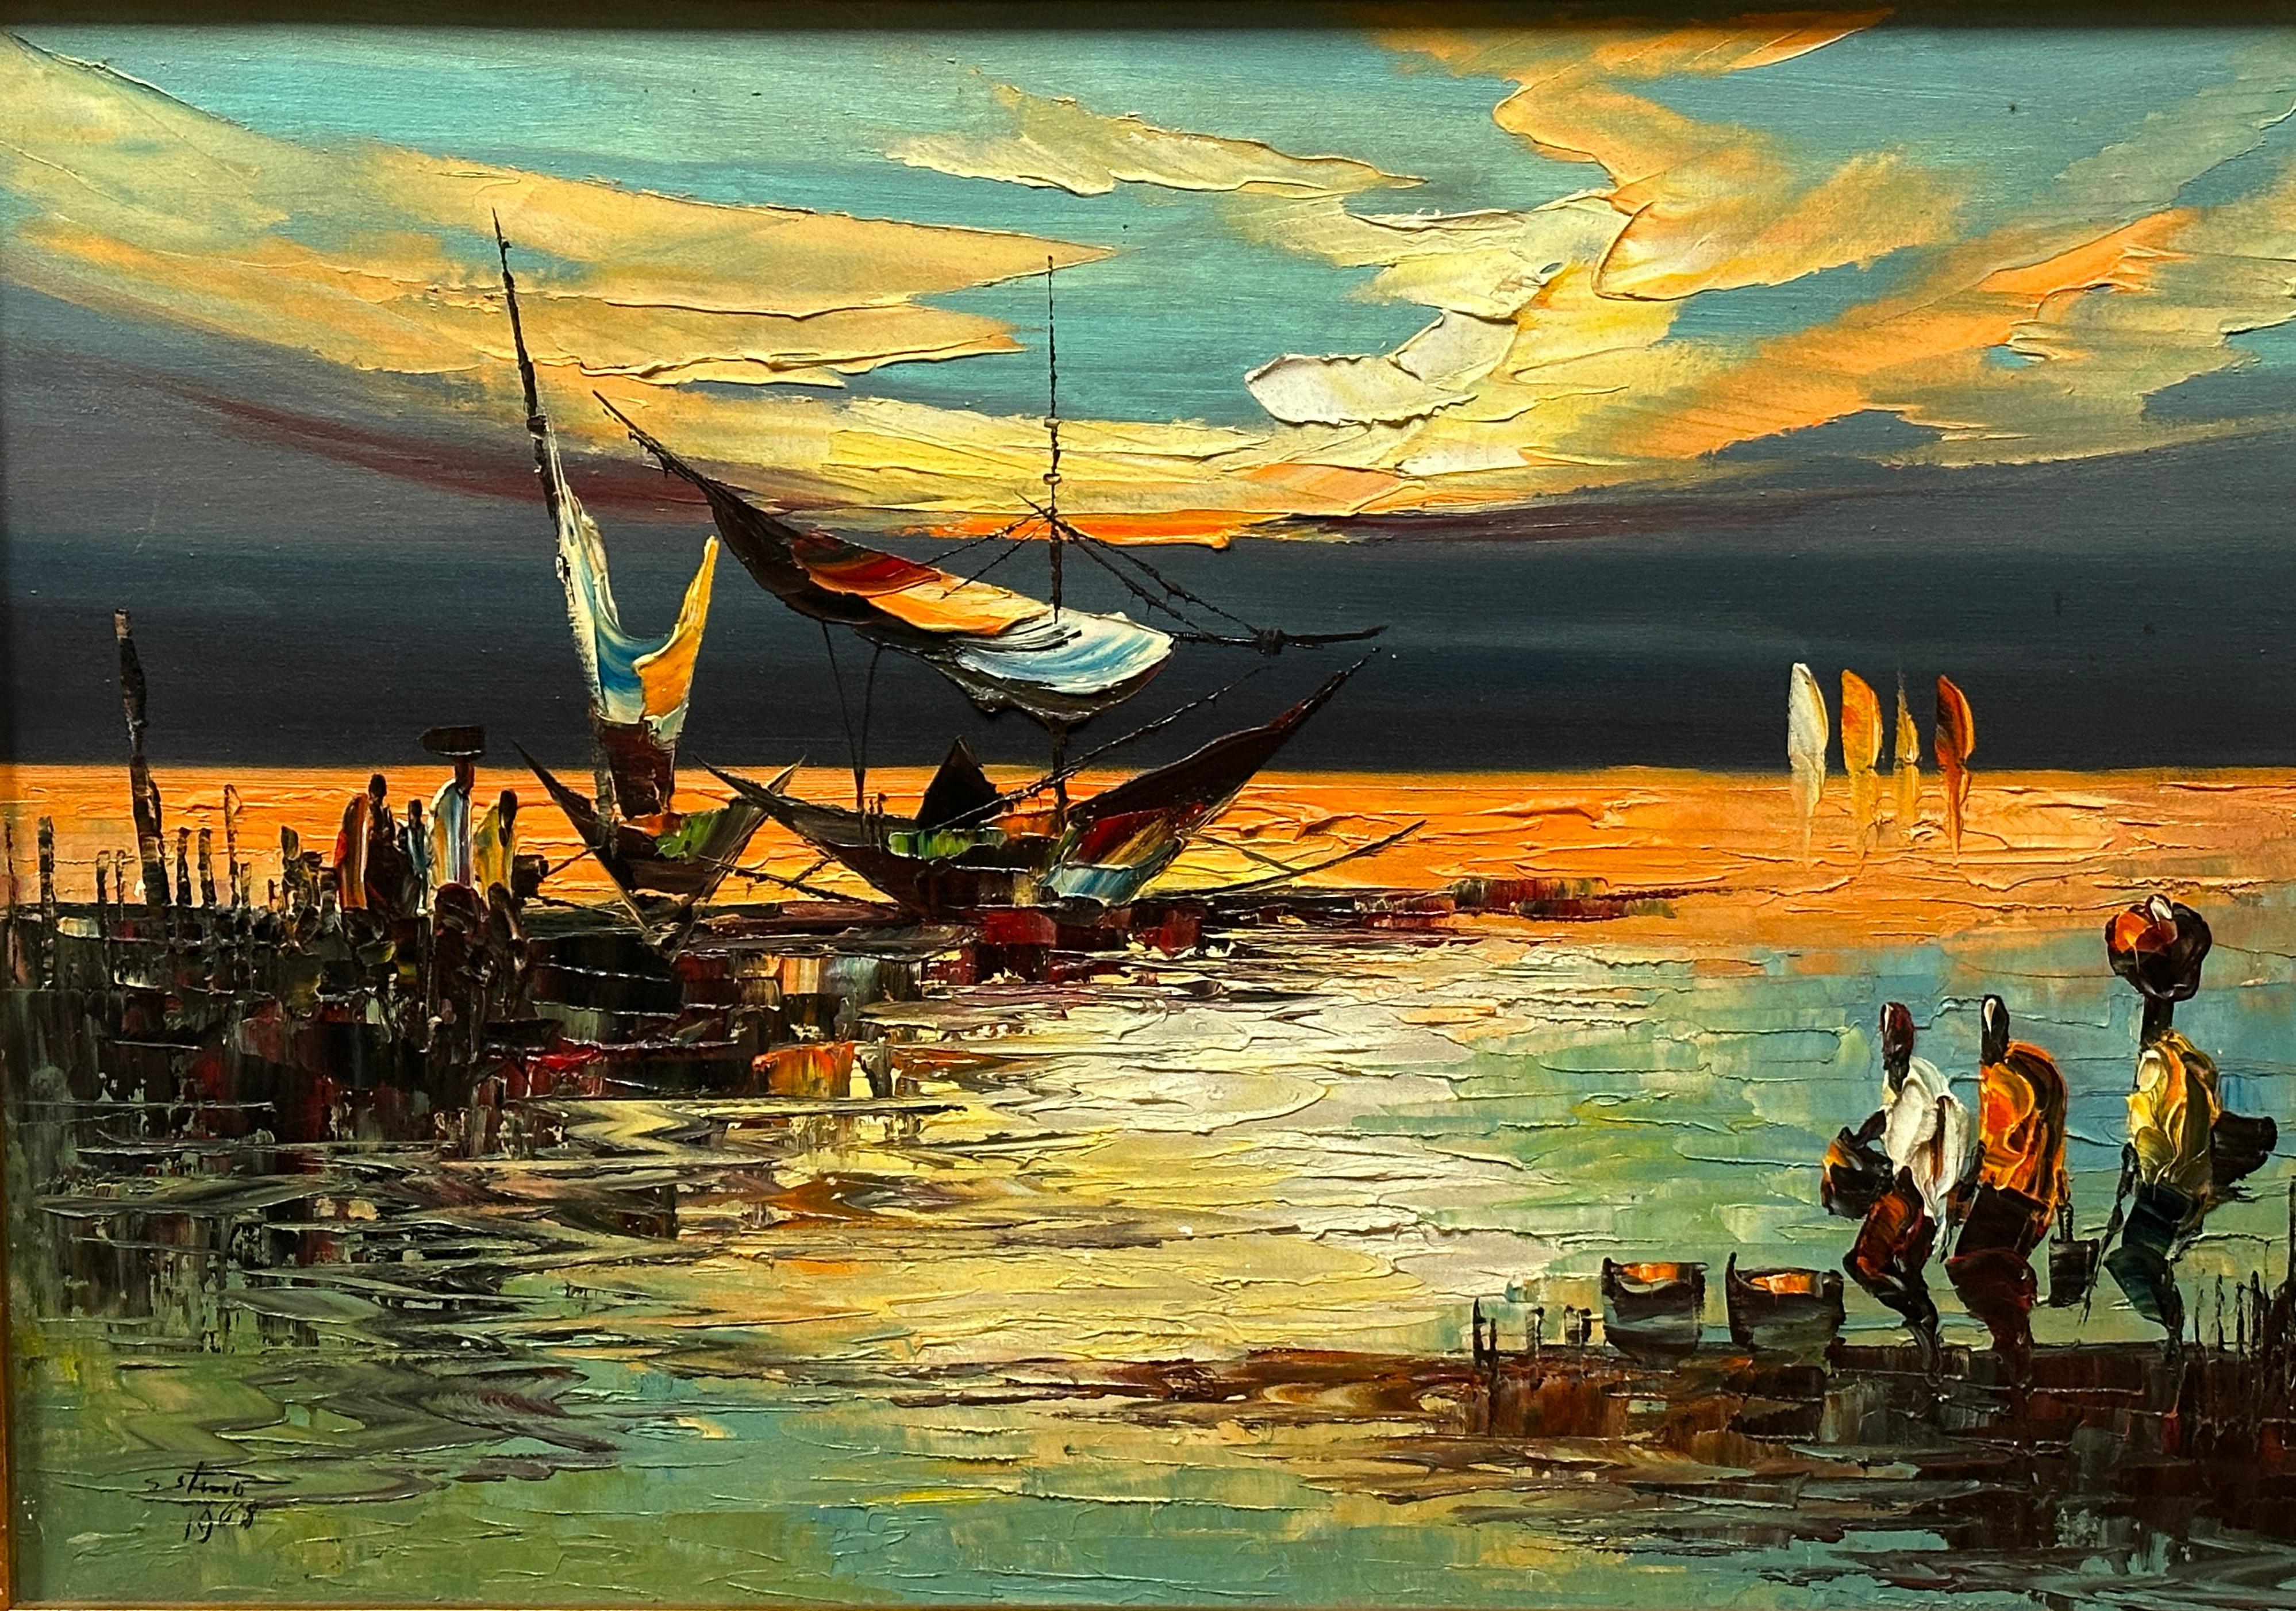 Knife painting involves using a palette knife instead of a brush to apply the paint, as in the case of this oil painting. In the context of a seascape at sunset, this technique adds texture and lends an expressive quality to what might be considered